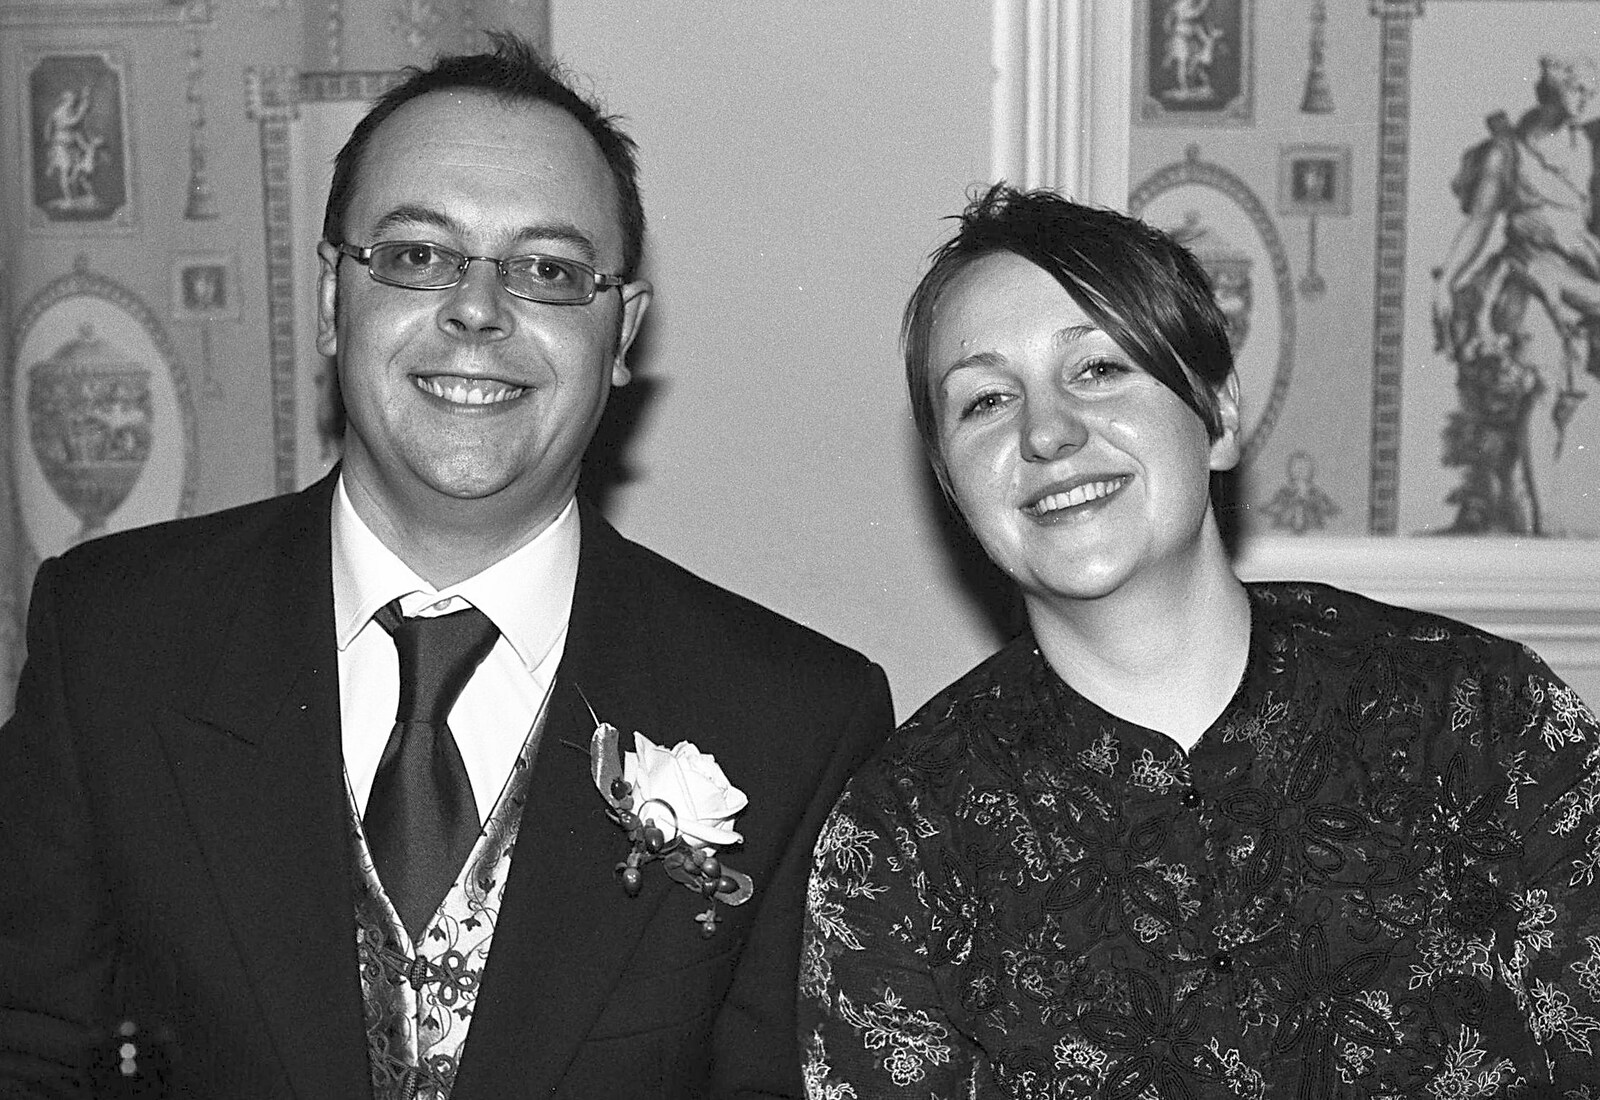 Matt and Debs from Sis's Nearly-Christmas Wedding, Meavy, Dartmoor - 20th December 2003